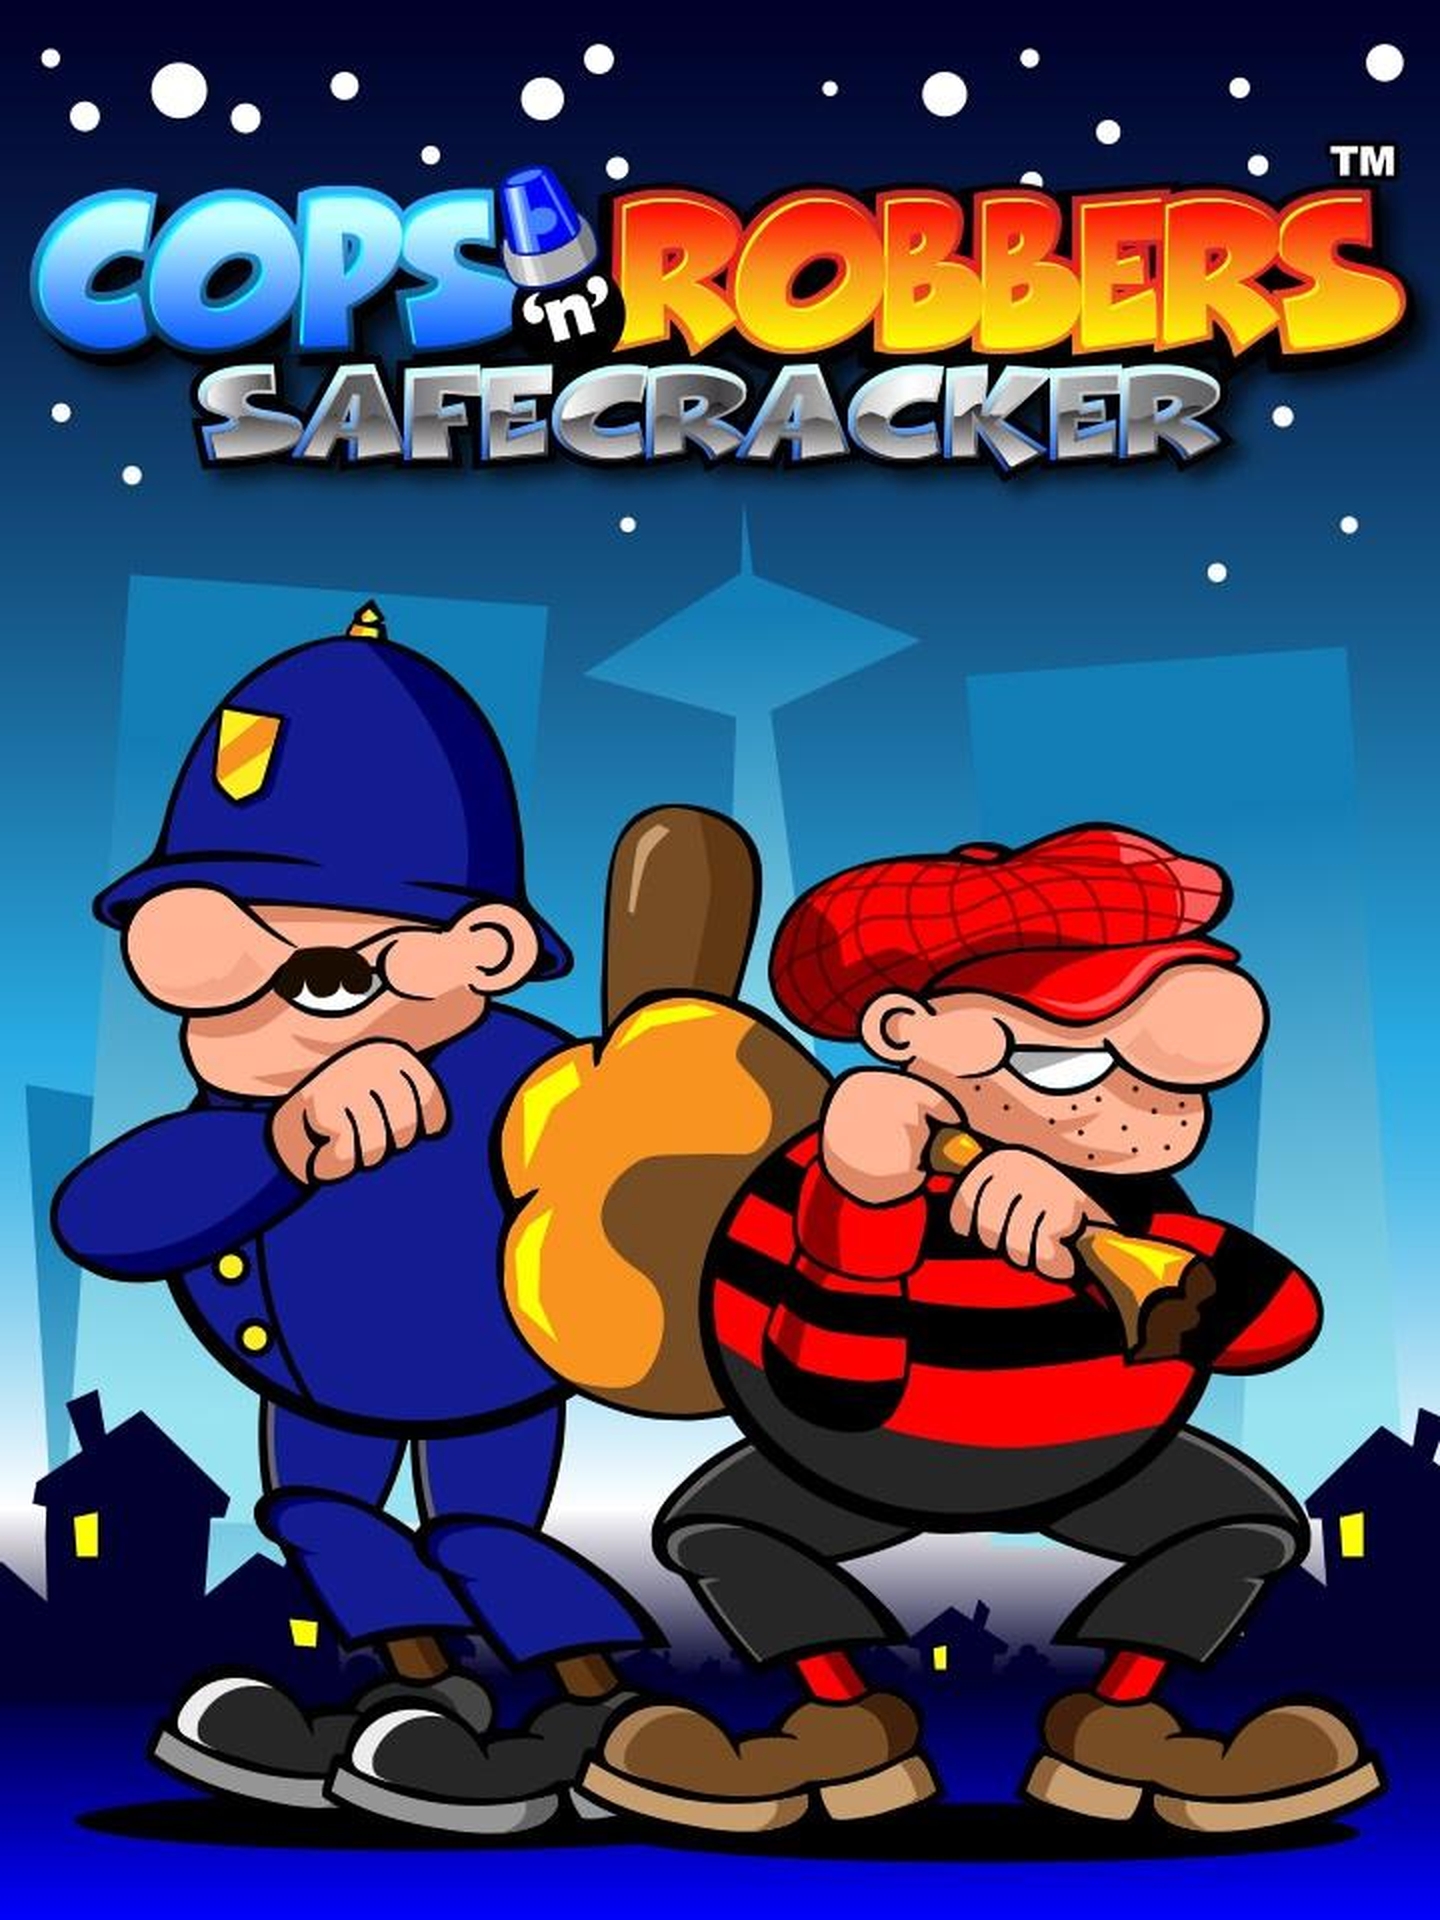 The Cops 'n' Robbers Safecracker Online Slot Demo Game by Mazooma